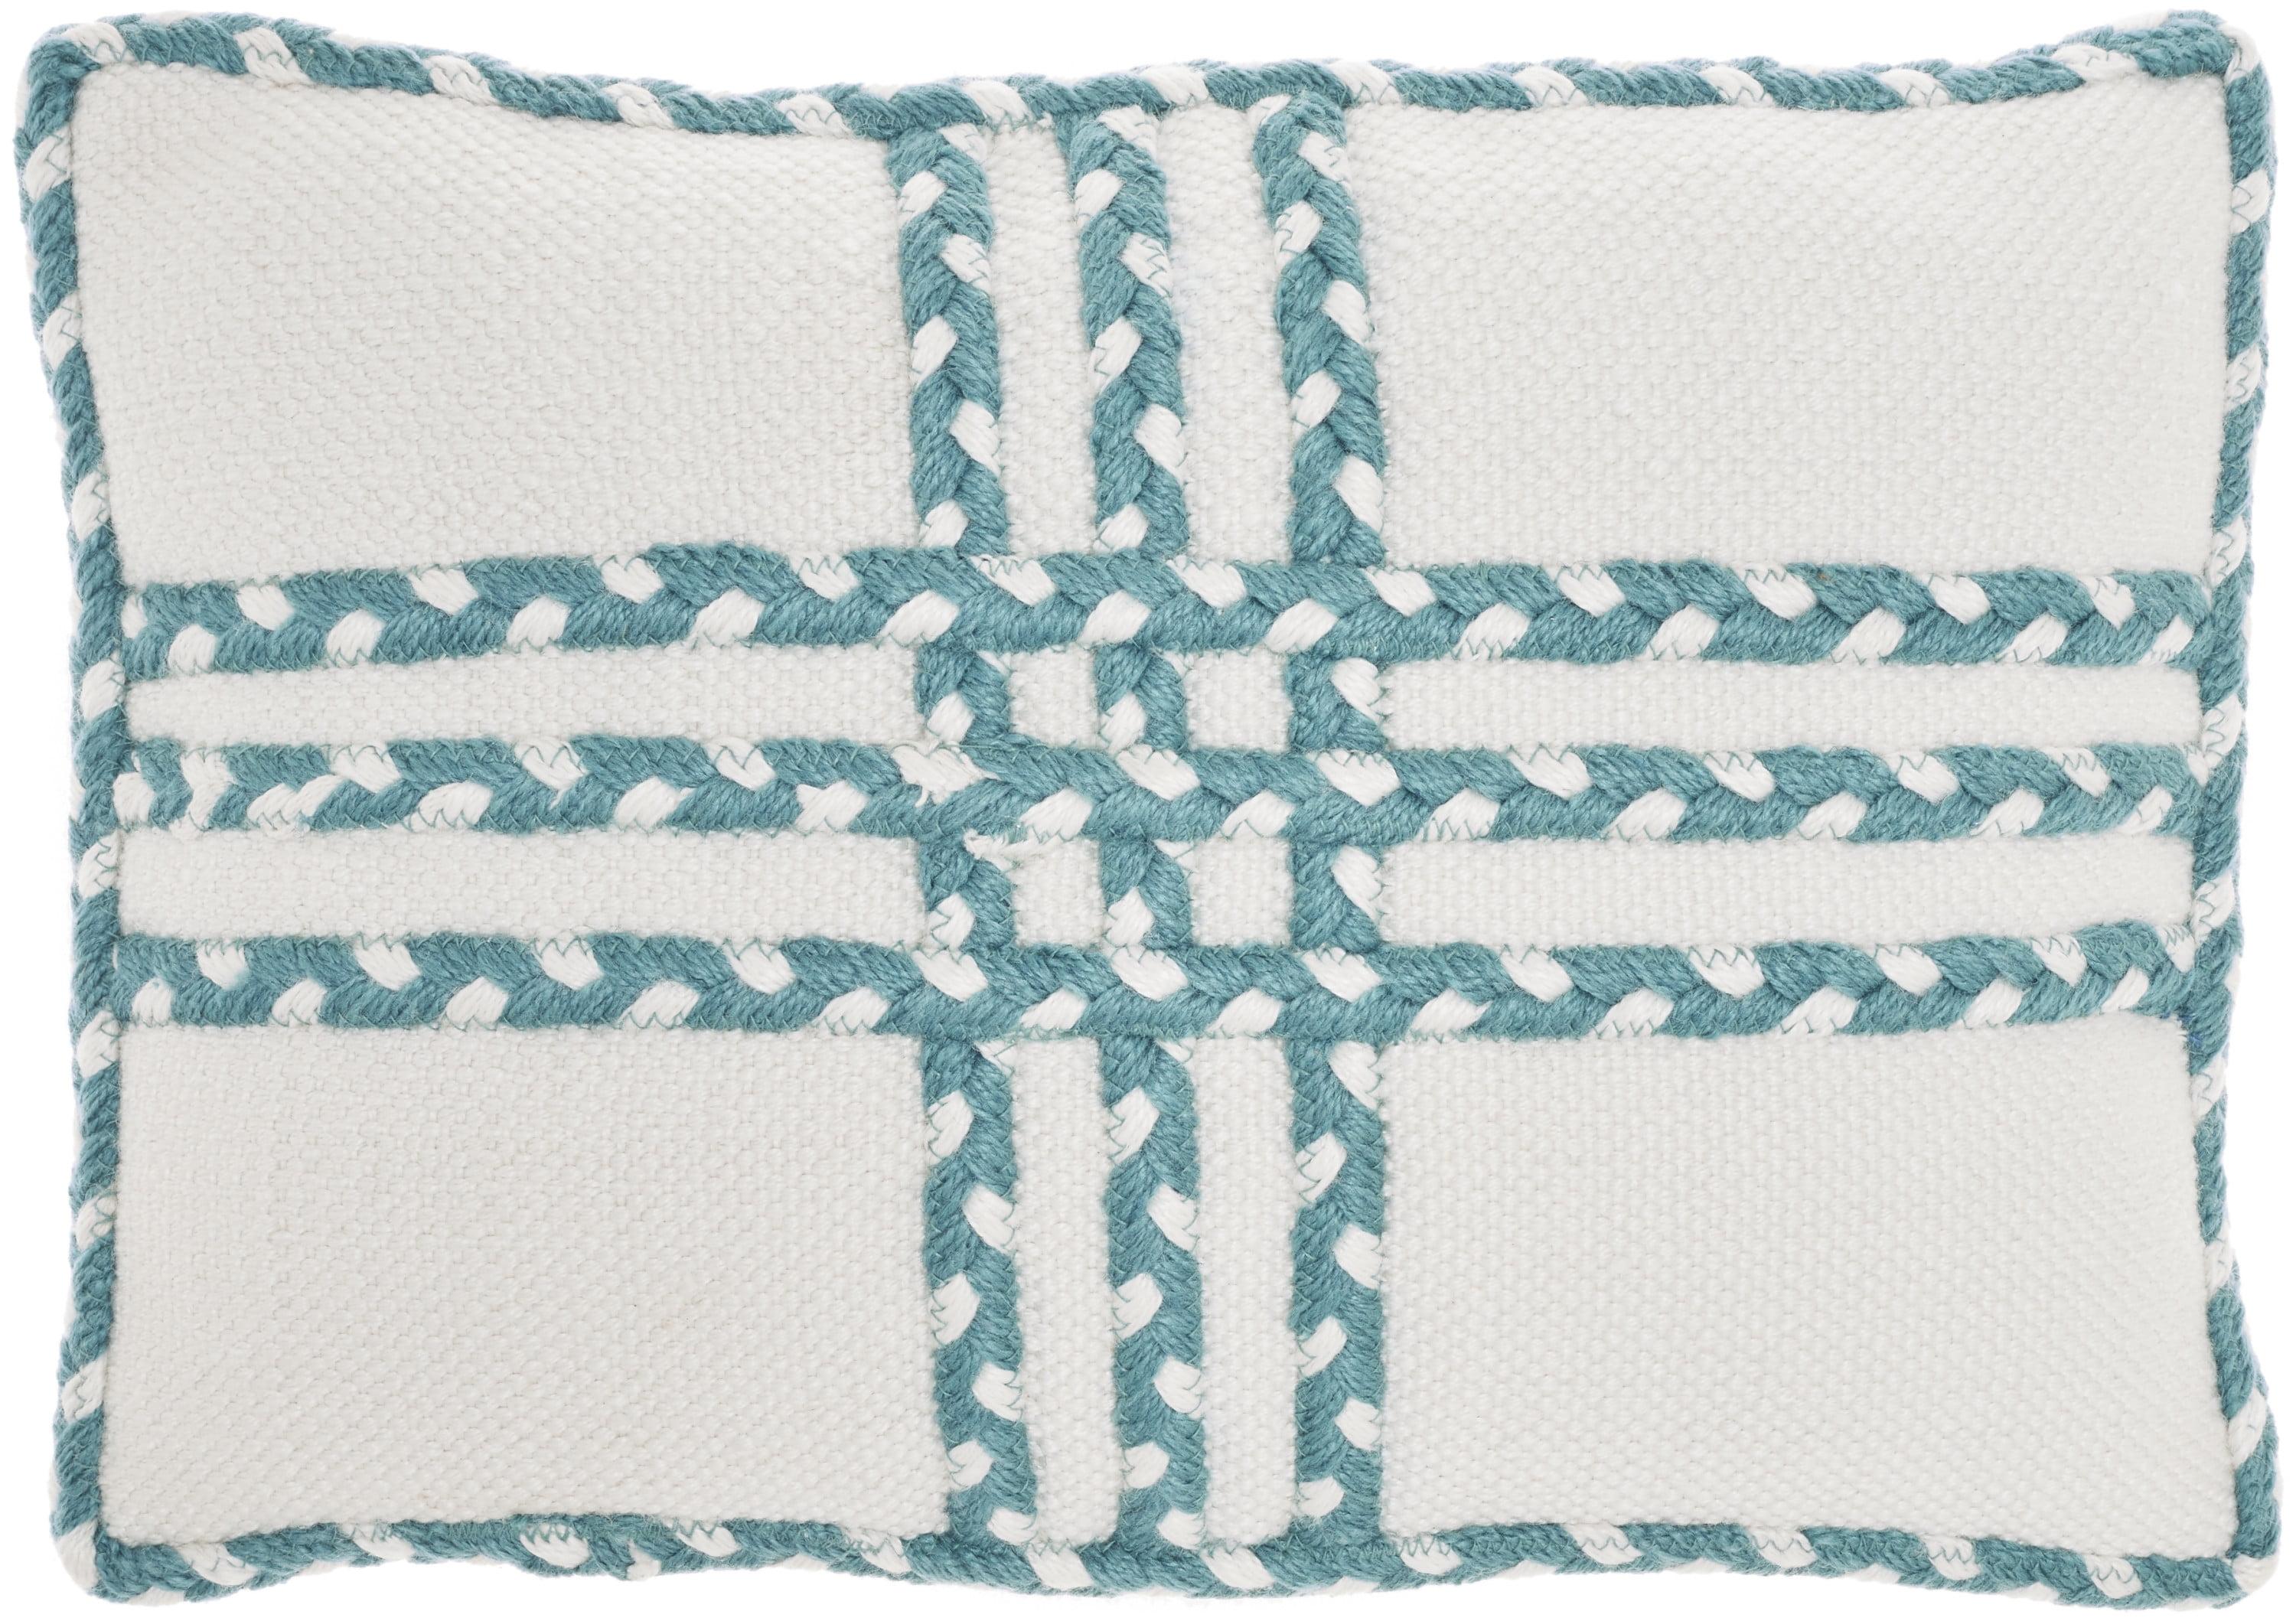 Lively Turquoise & Ivory Cross Braided 14"x20" Outdoor Lumbar Pillow